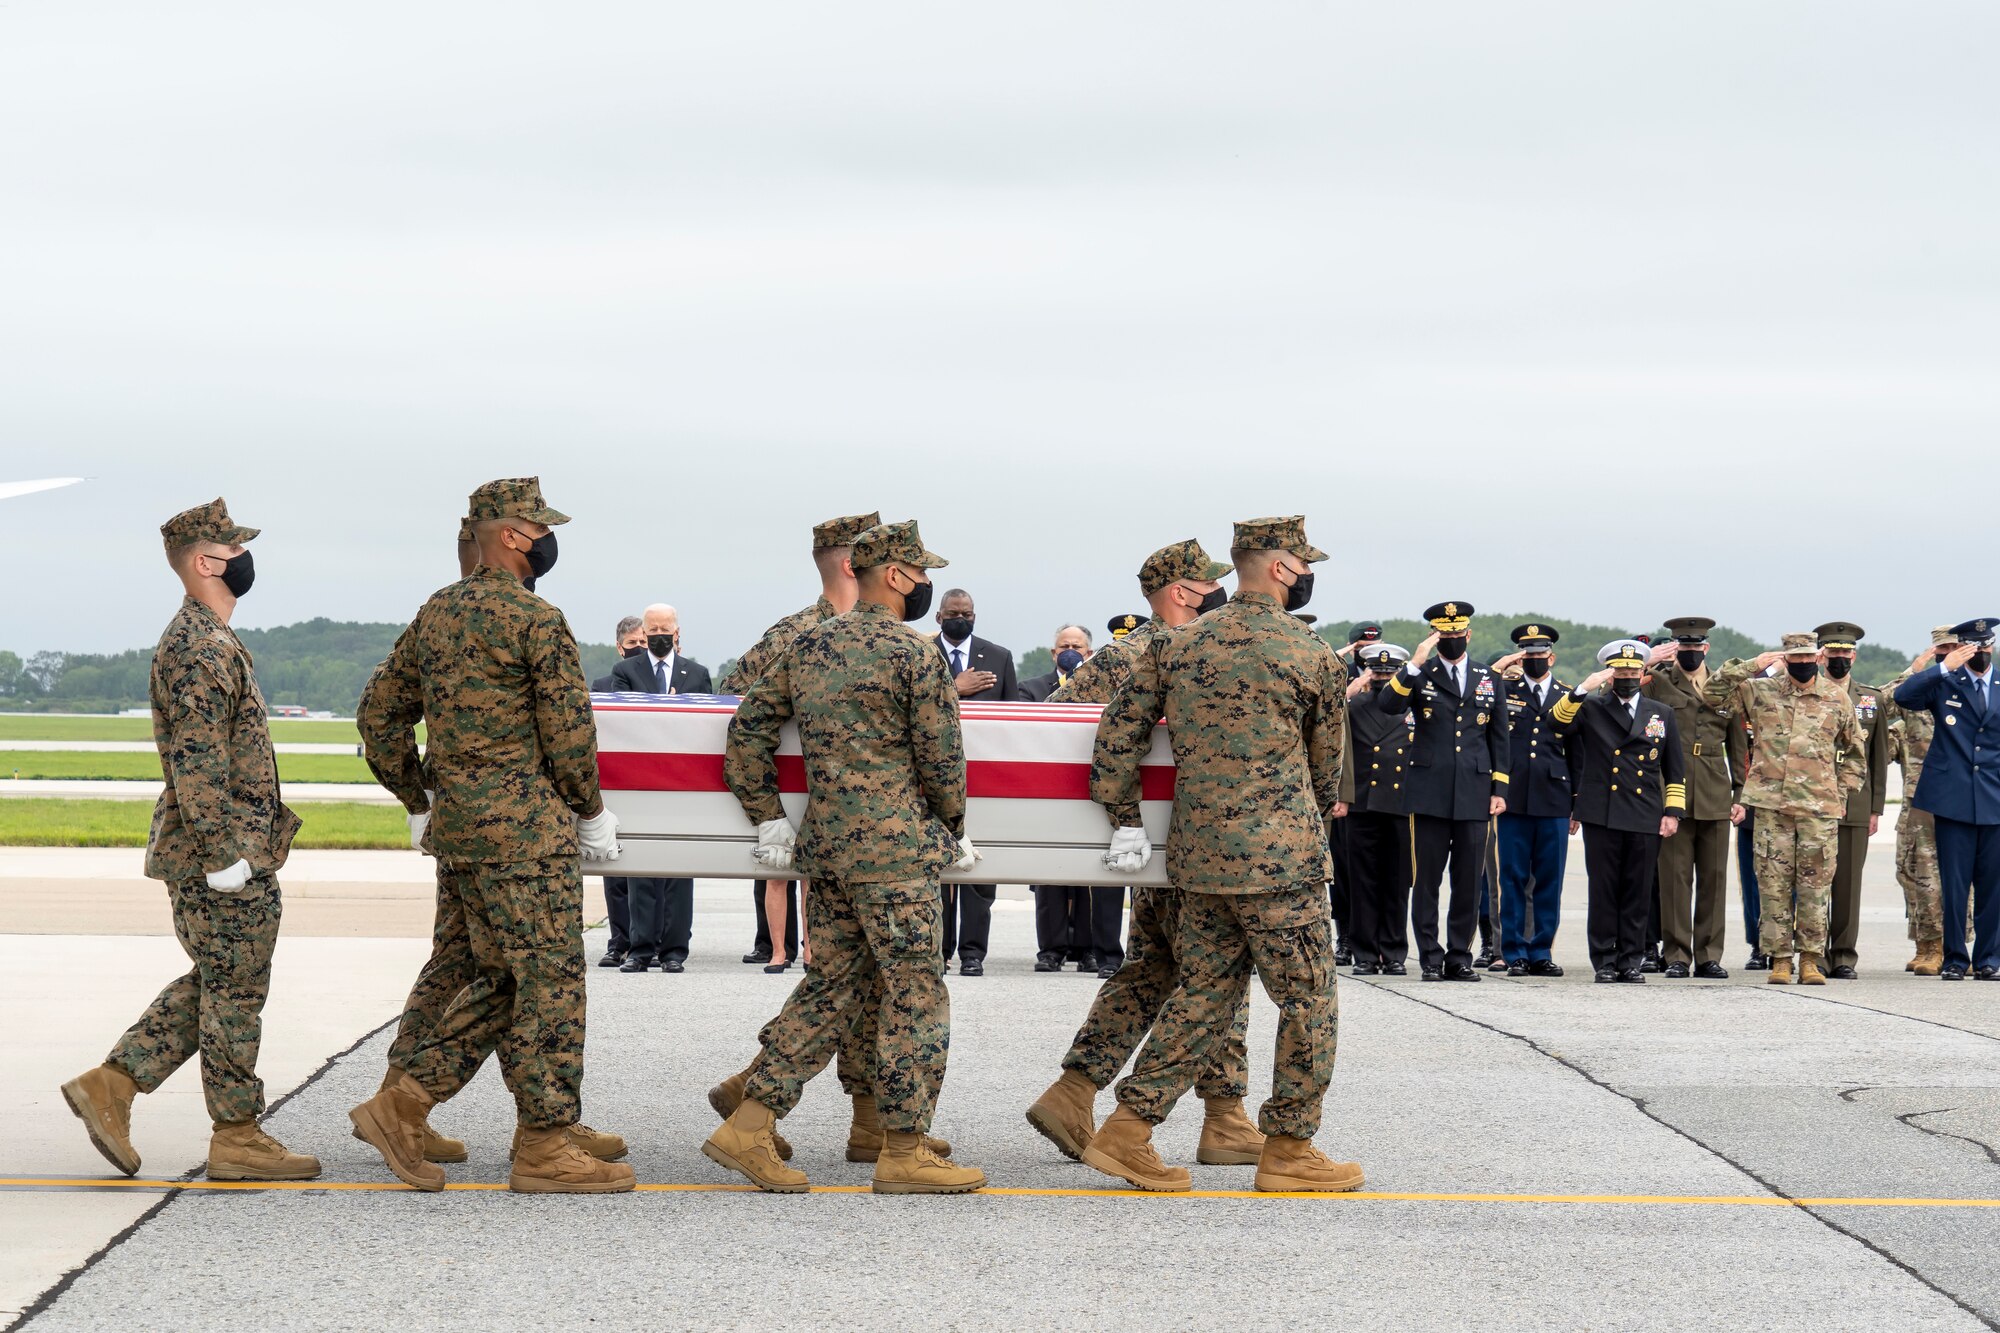 A U.S. Marine Corps carry team transfers the remains of Marine Corps Cpl. Humberto A. Sanchez of Logansport, Indiana, Aug. 29, 2021 at Dover Air Force Base, Delaware. Sanchez was assigned to 2nd Battalion, 1st Marine Regiment, 1st Marine Division, I Marine Expeditionary Force, Camp Pendleton, California. (U.S. Air Force photo by Jason Minto)